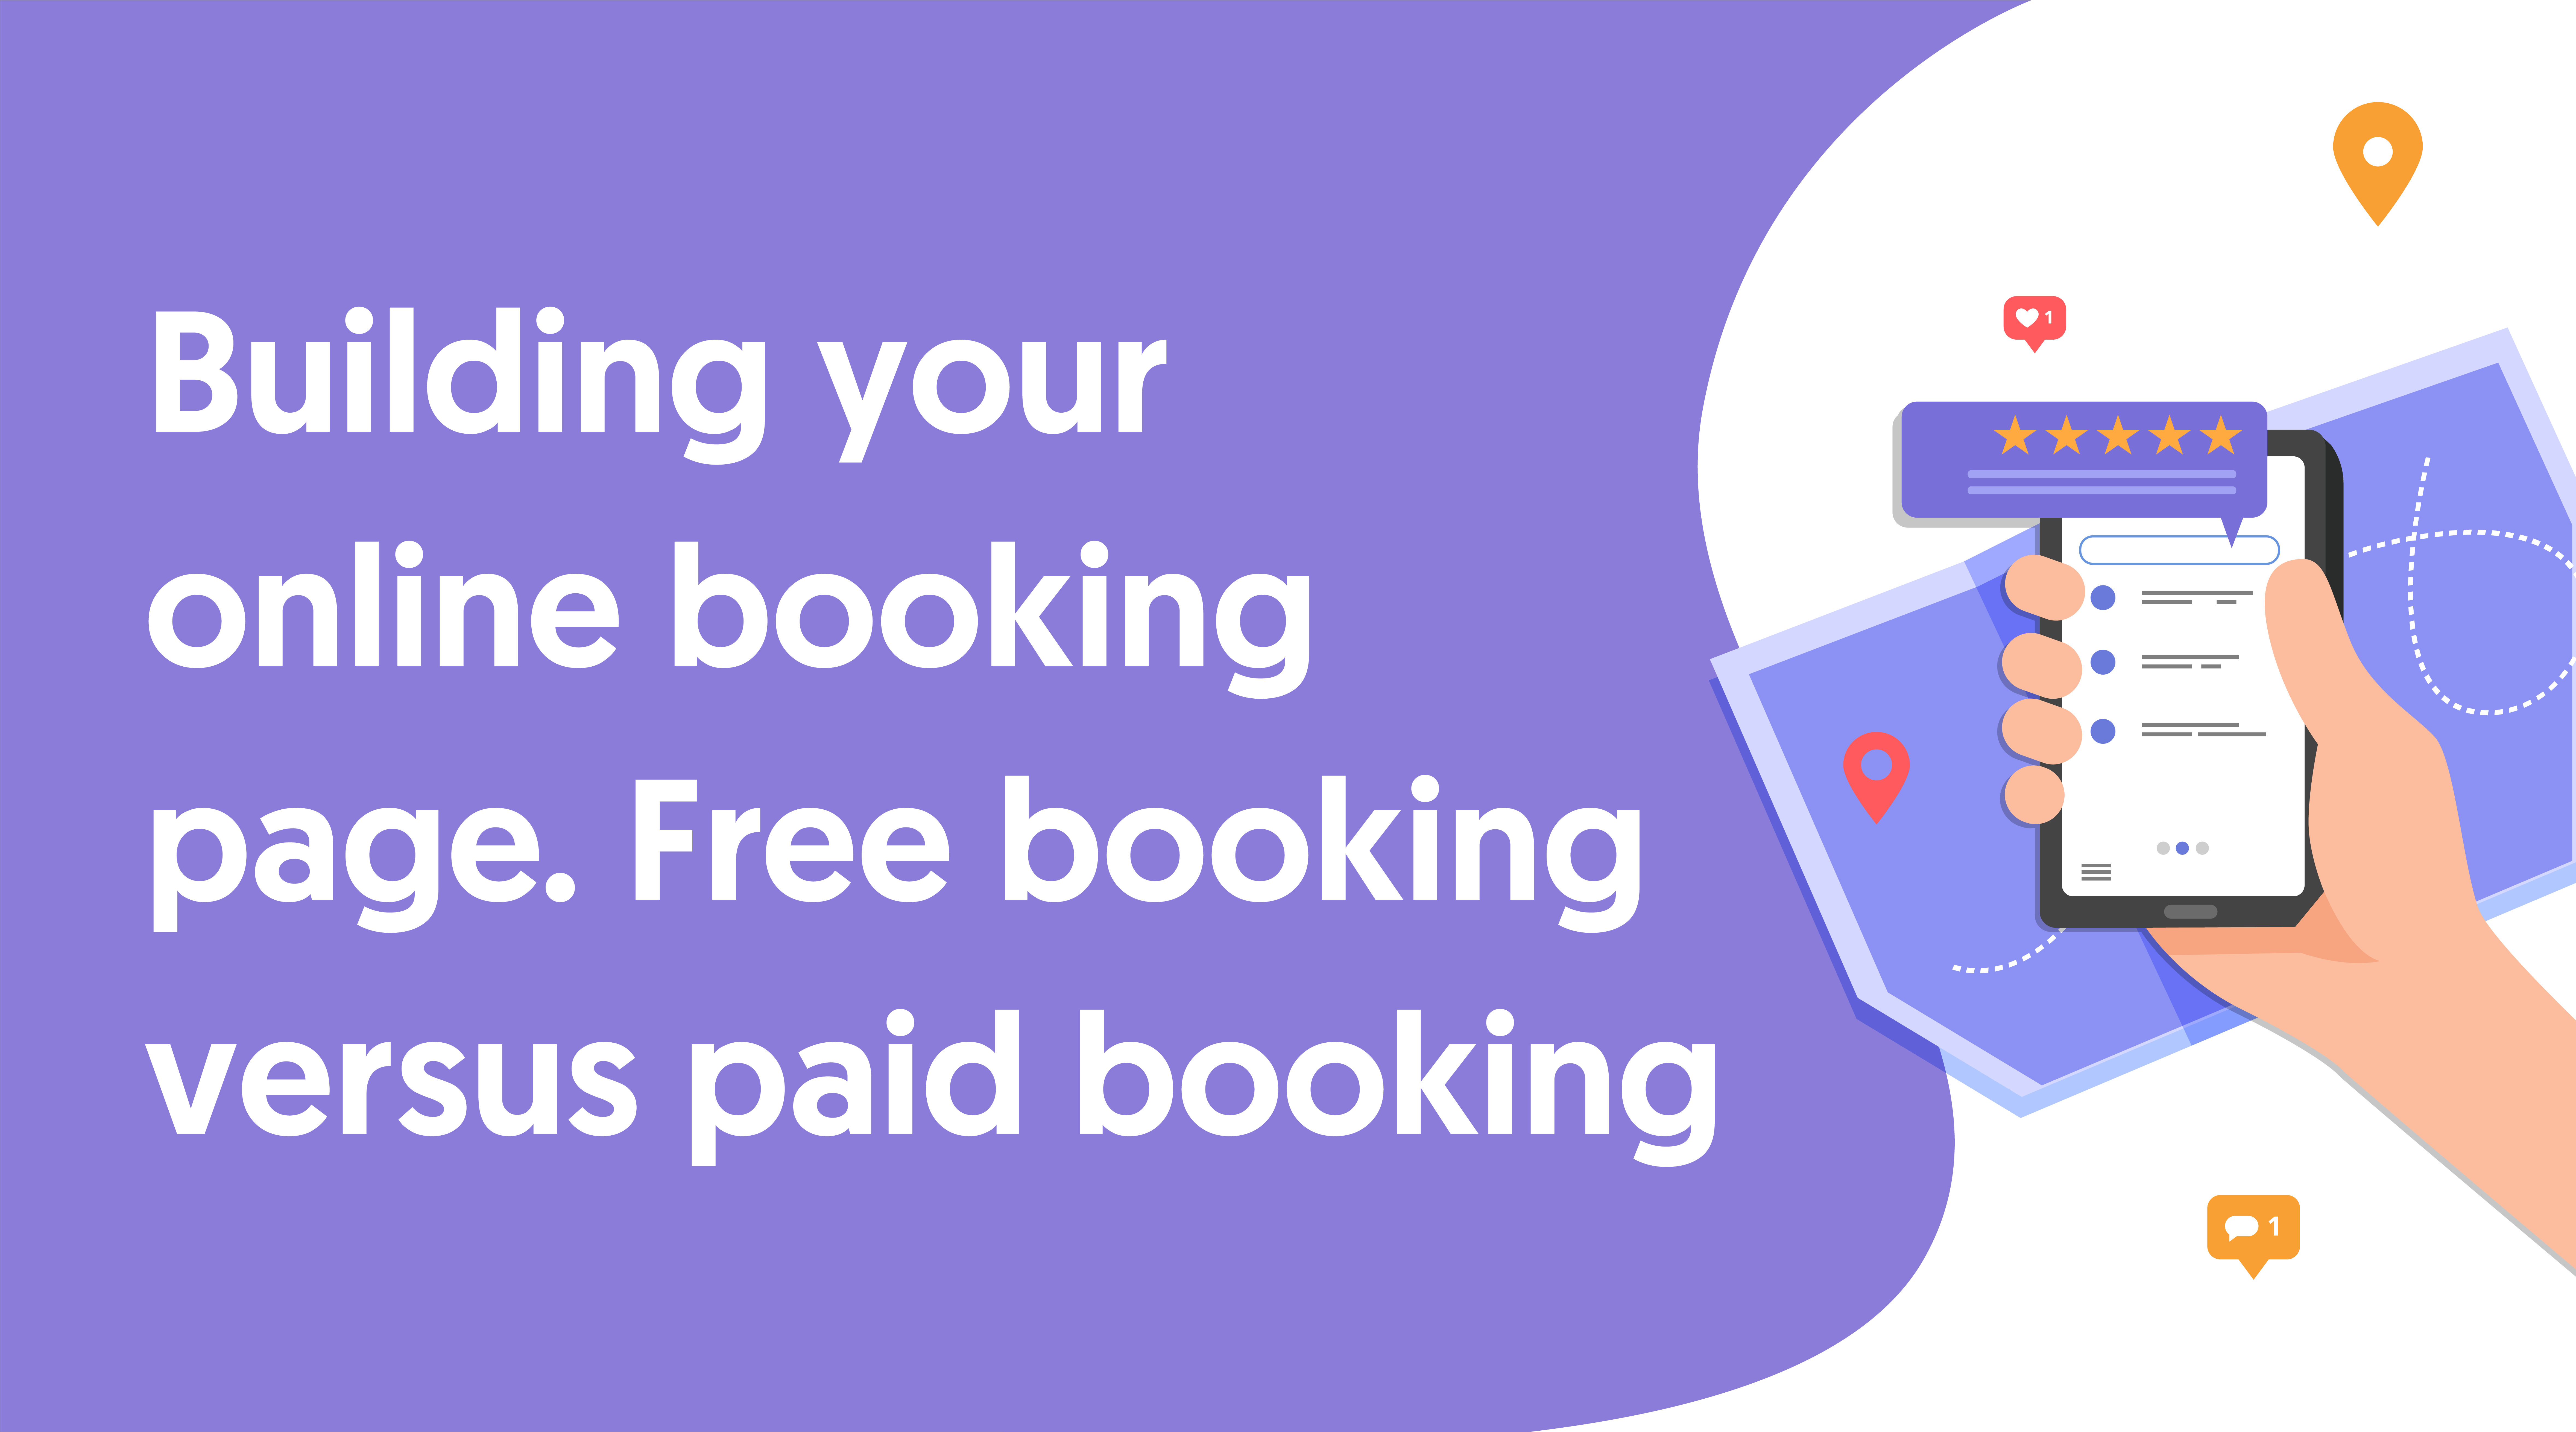 The difference between free and paid bookings